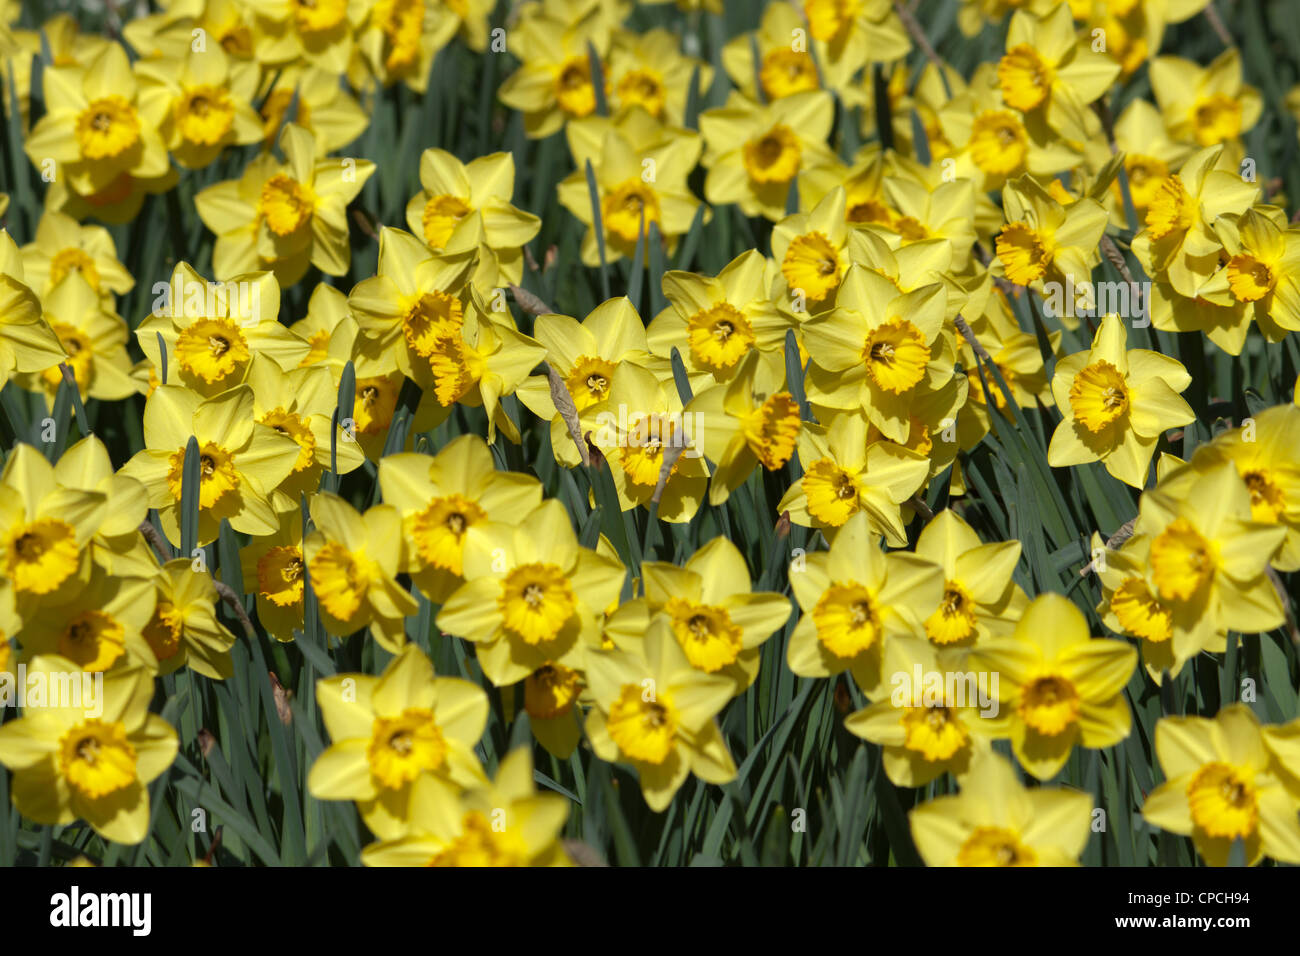 Profusion of yellow narcissus Stock Photo